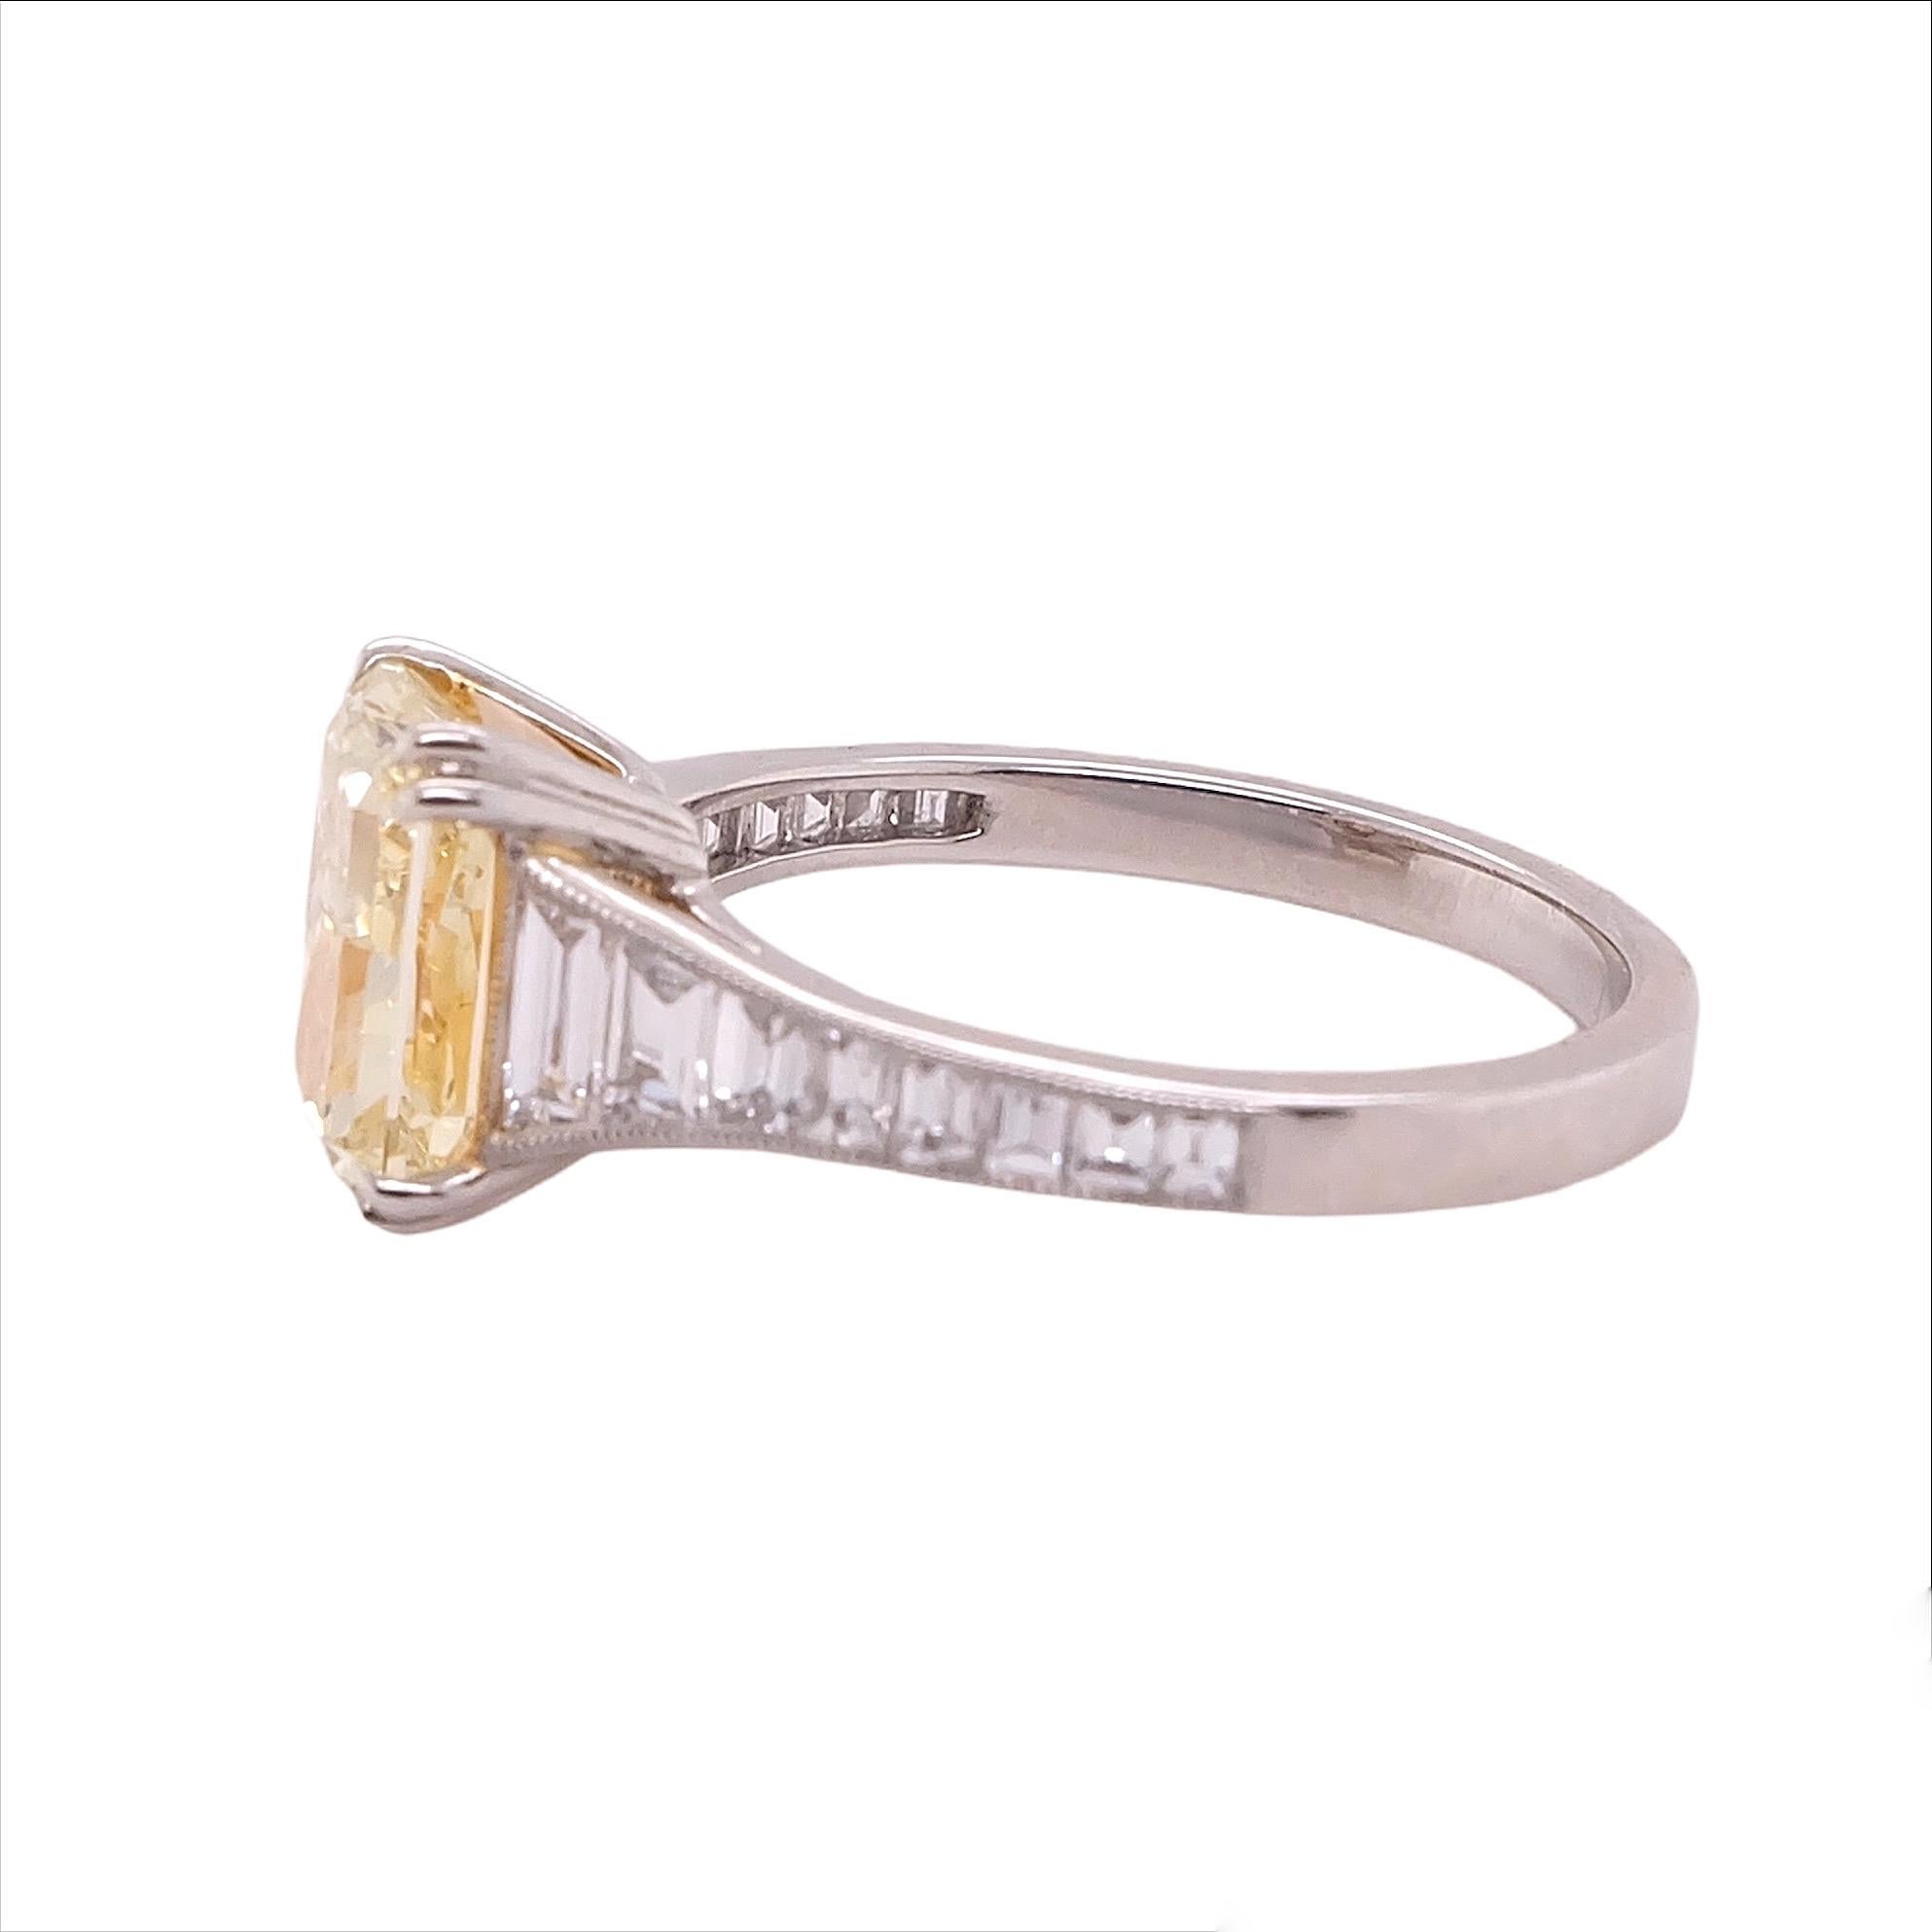 Gorgeous platinum ring by Sophia D. that features a GIA certified fancy light yellow diamond center stone that weighs 2.50 carat with a color and clarity of Y-Z, VVS1 and accentuated with small diamond stones that weigh 0.63 carat. 

Sophia D by